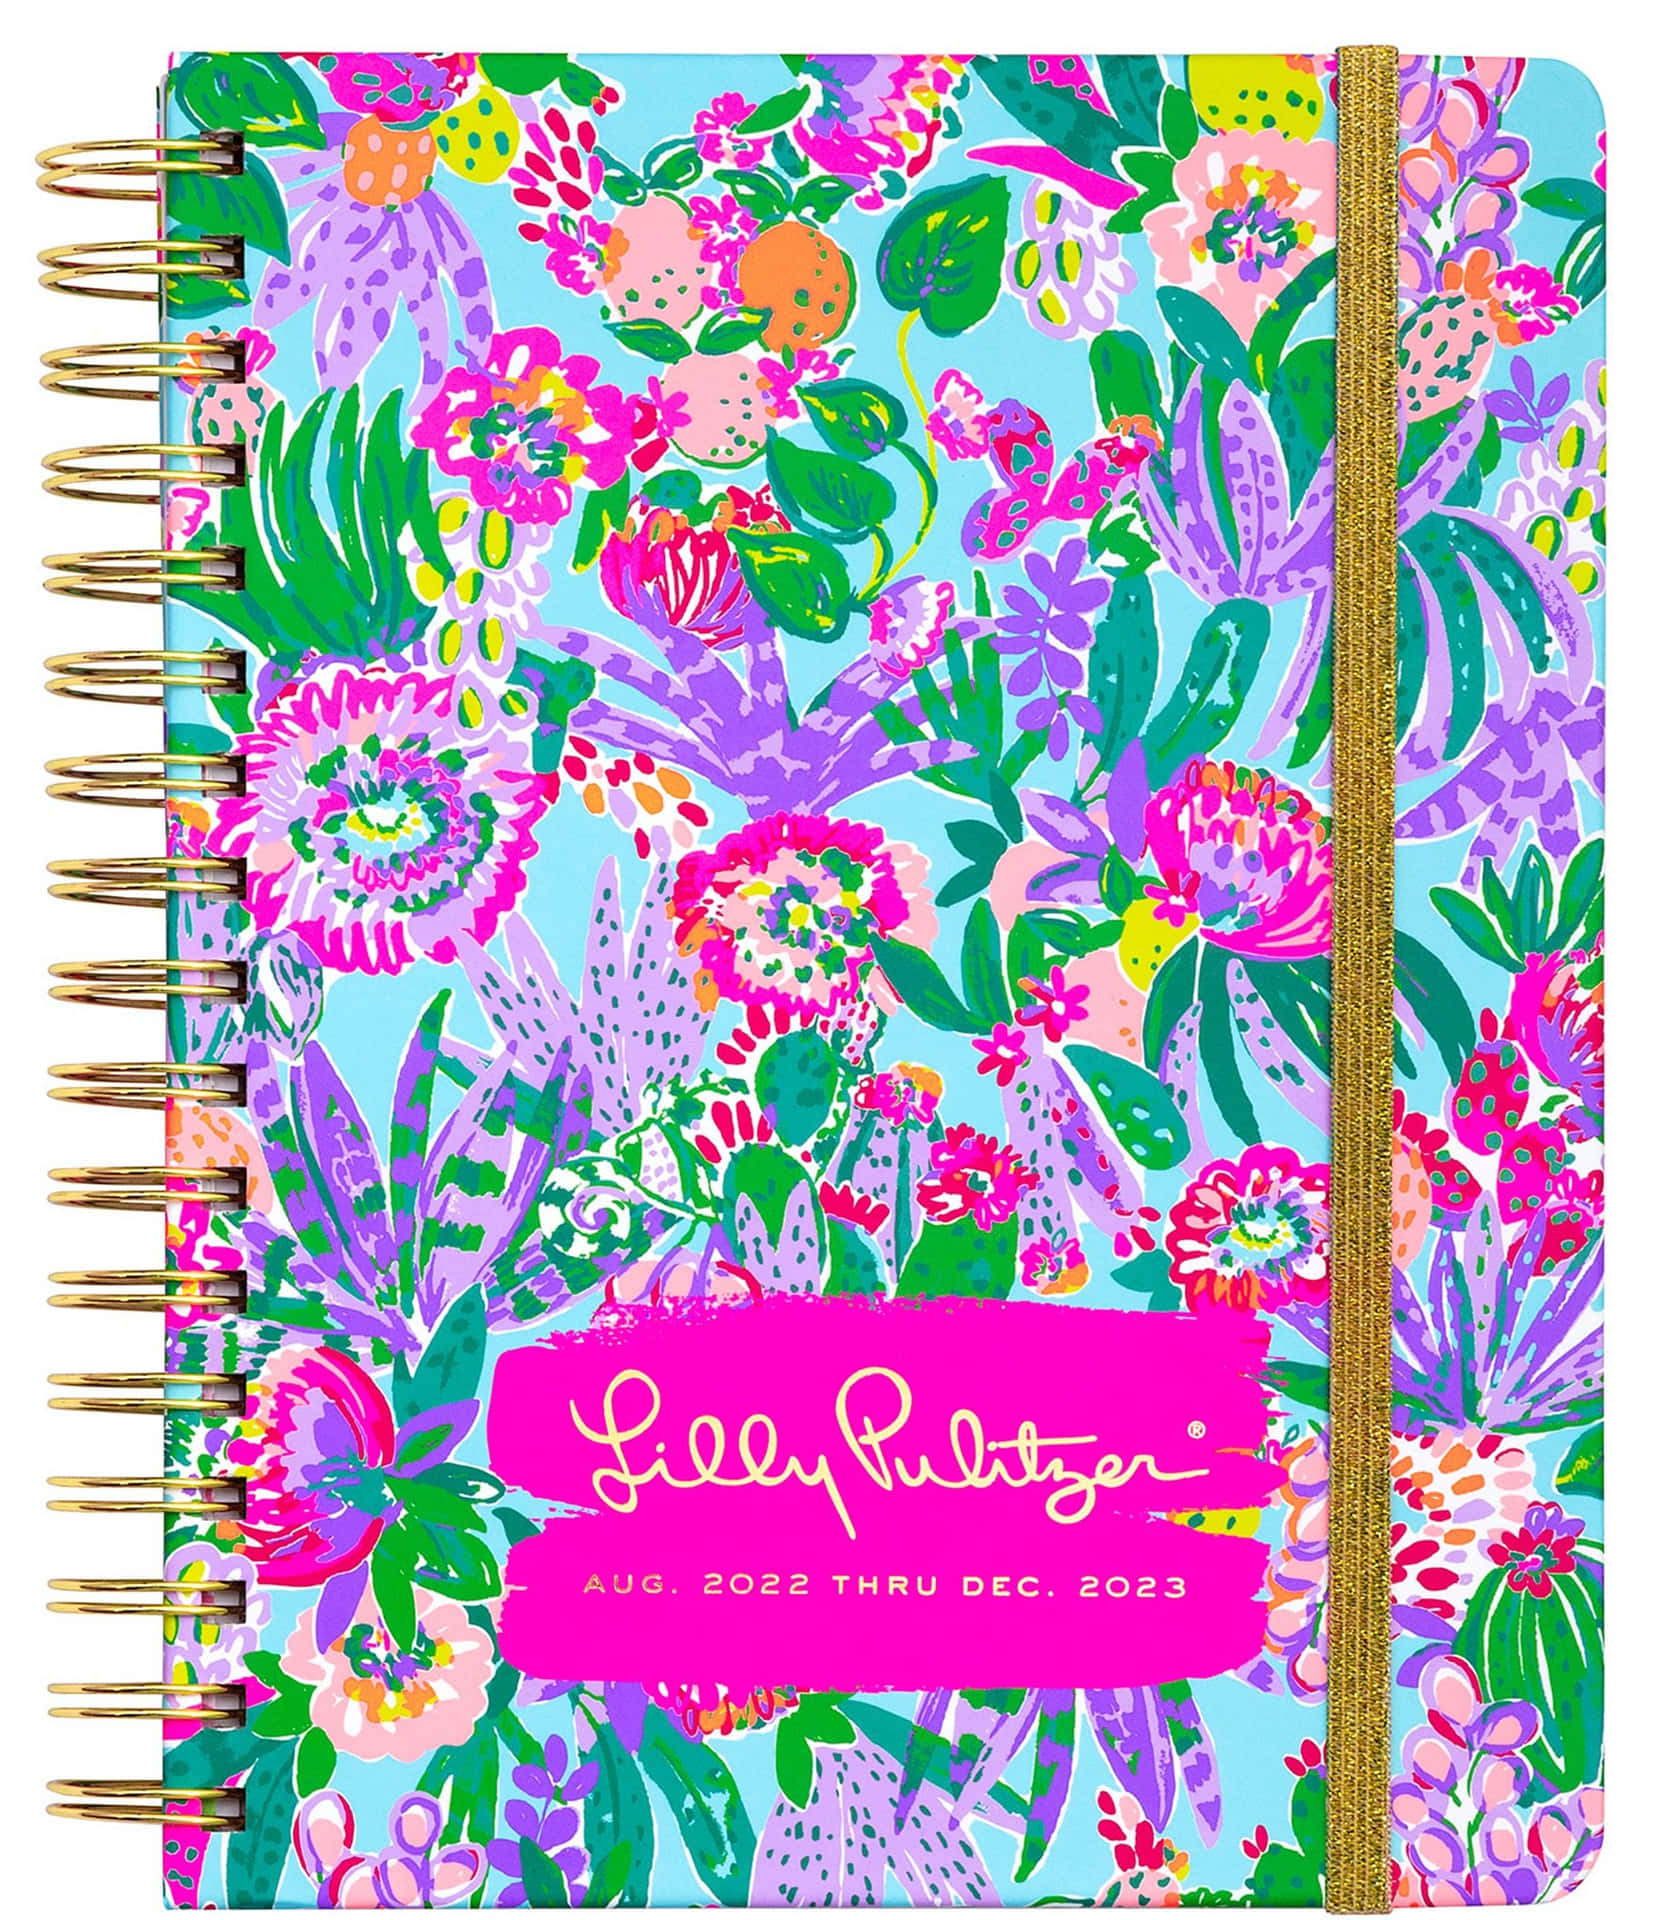 Embrace your style in Lilly Pulitzer's bright, colorful prints